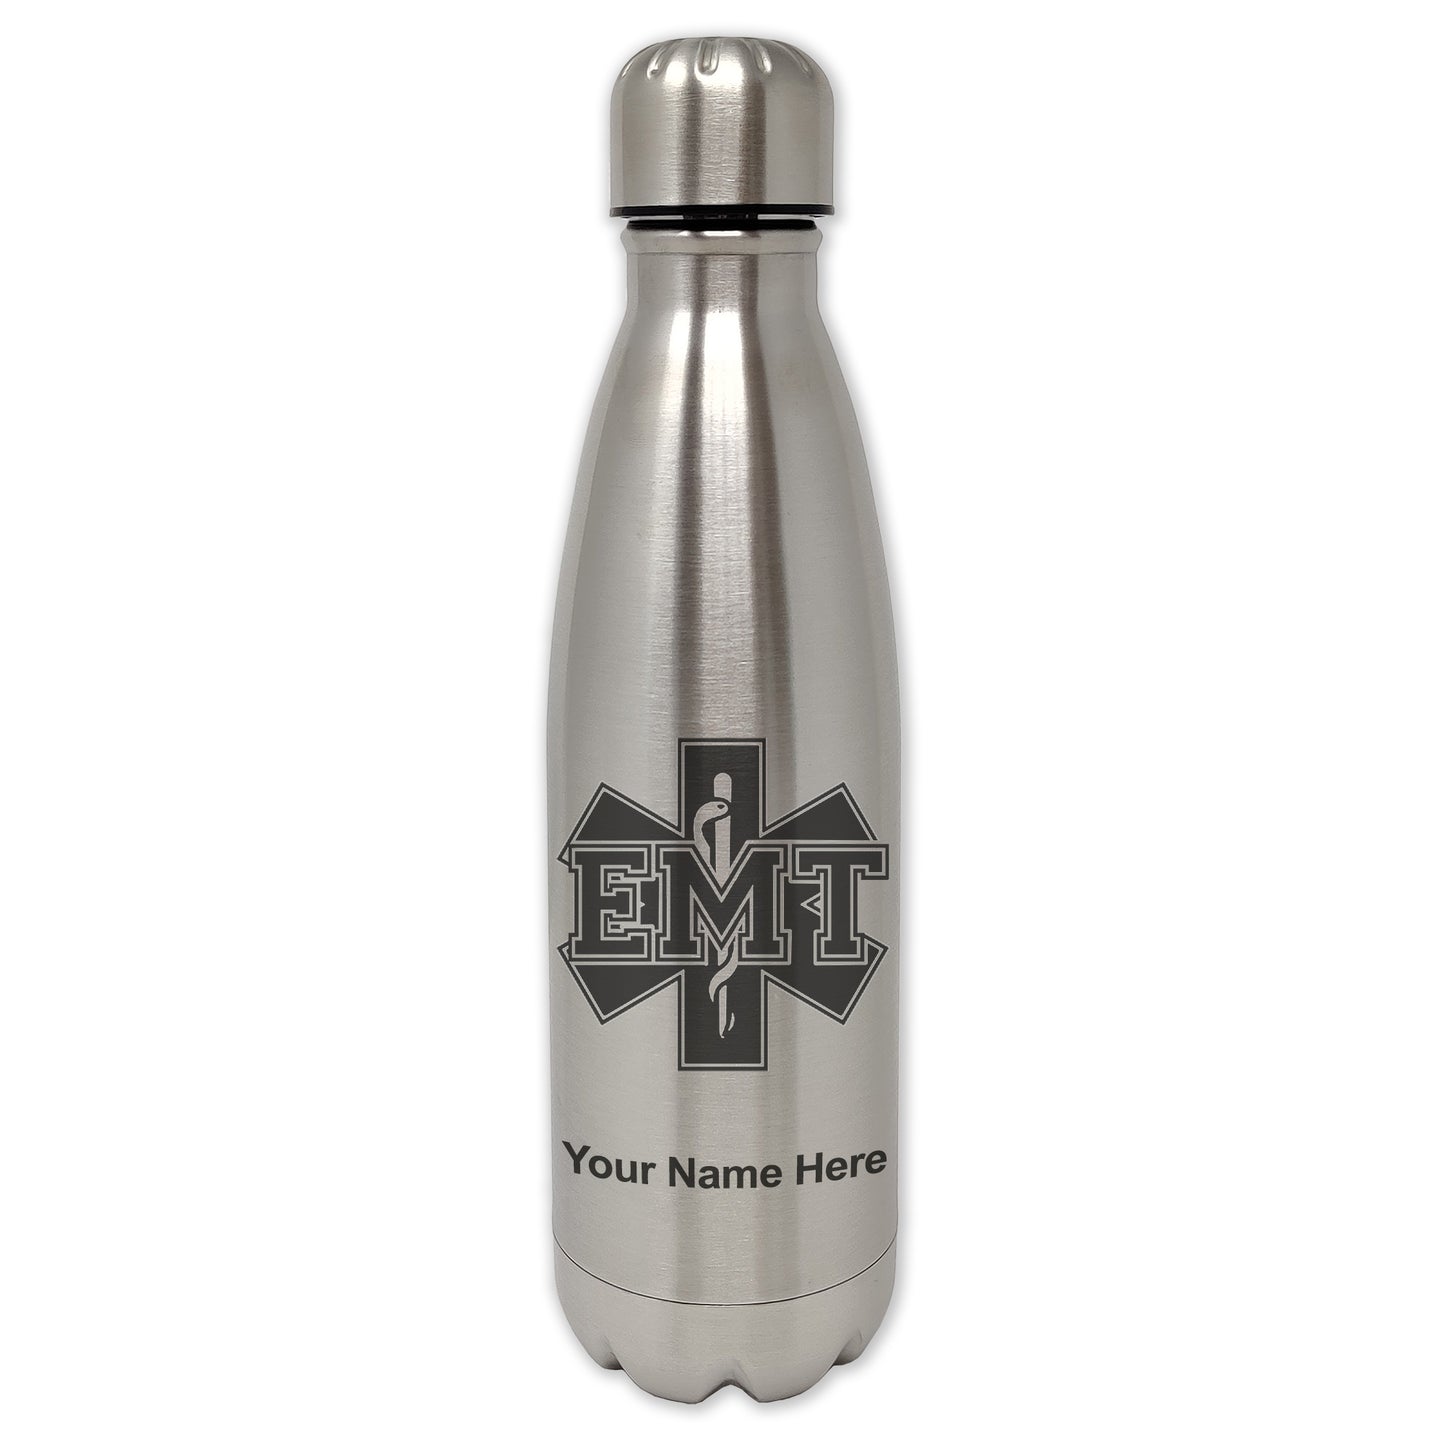 LaserGram Single Wall Water Bottle, EMT Emergency Medical Technician, Personalized Engraving Included